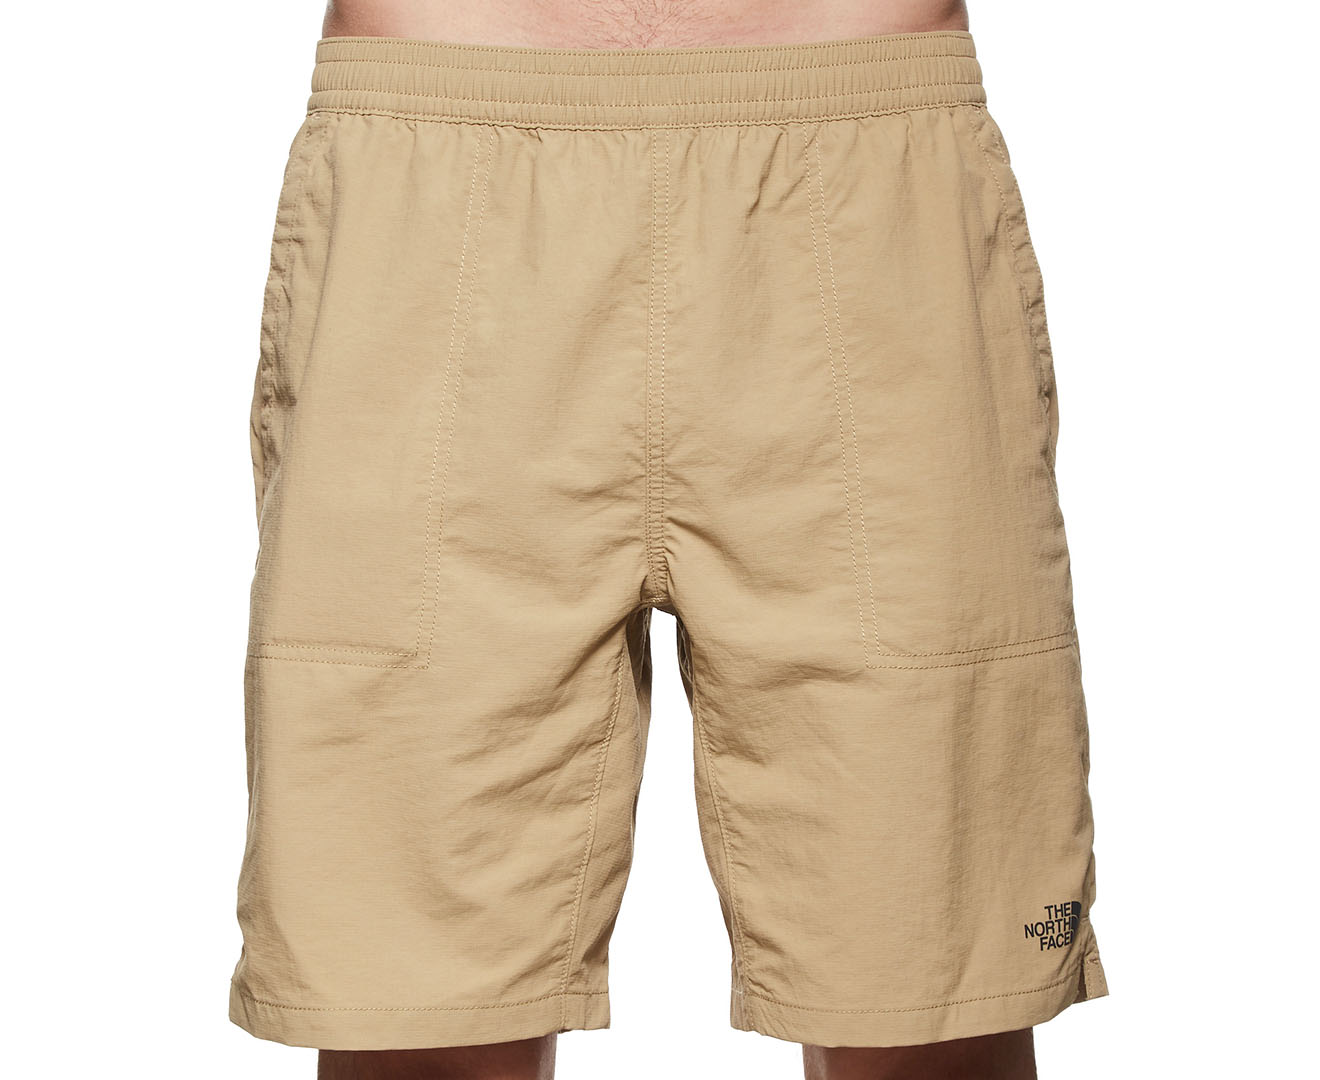 The North Face Men's Pull-On Adventure Shorts - Tan | Catch.com.au